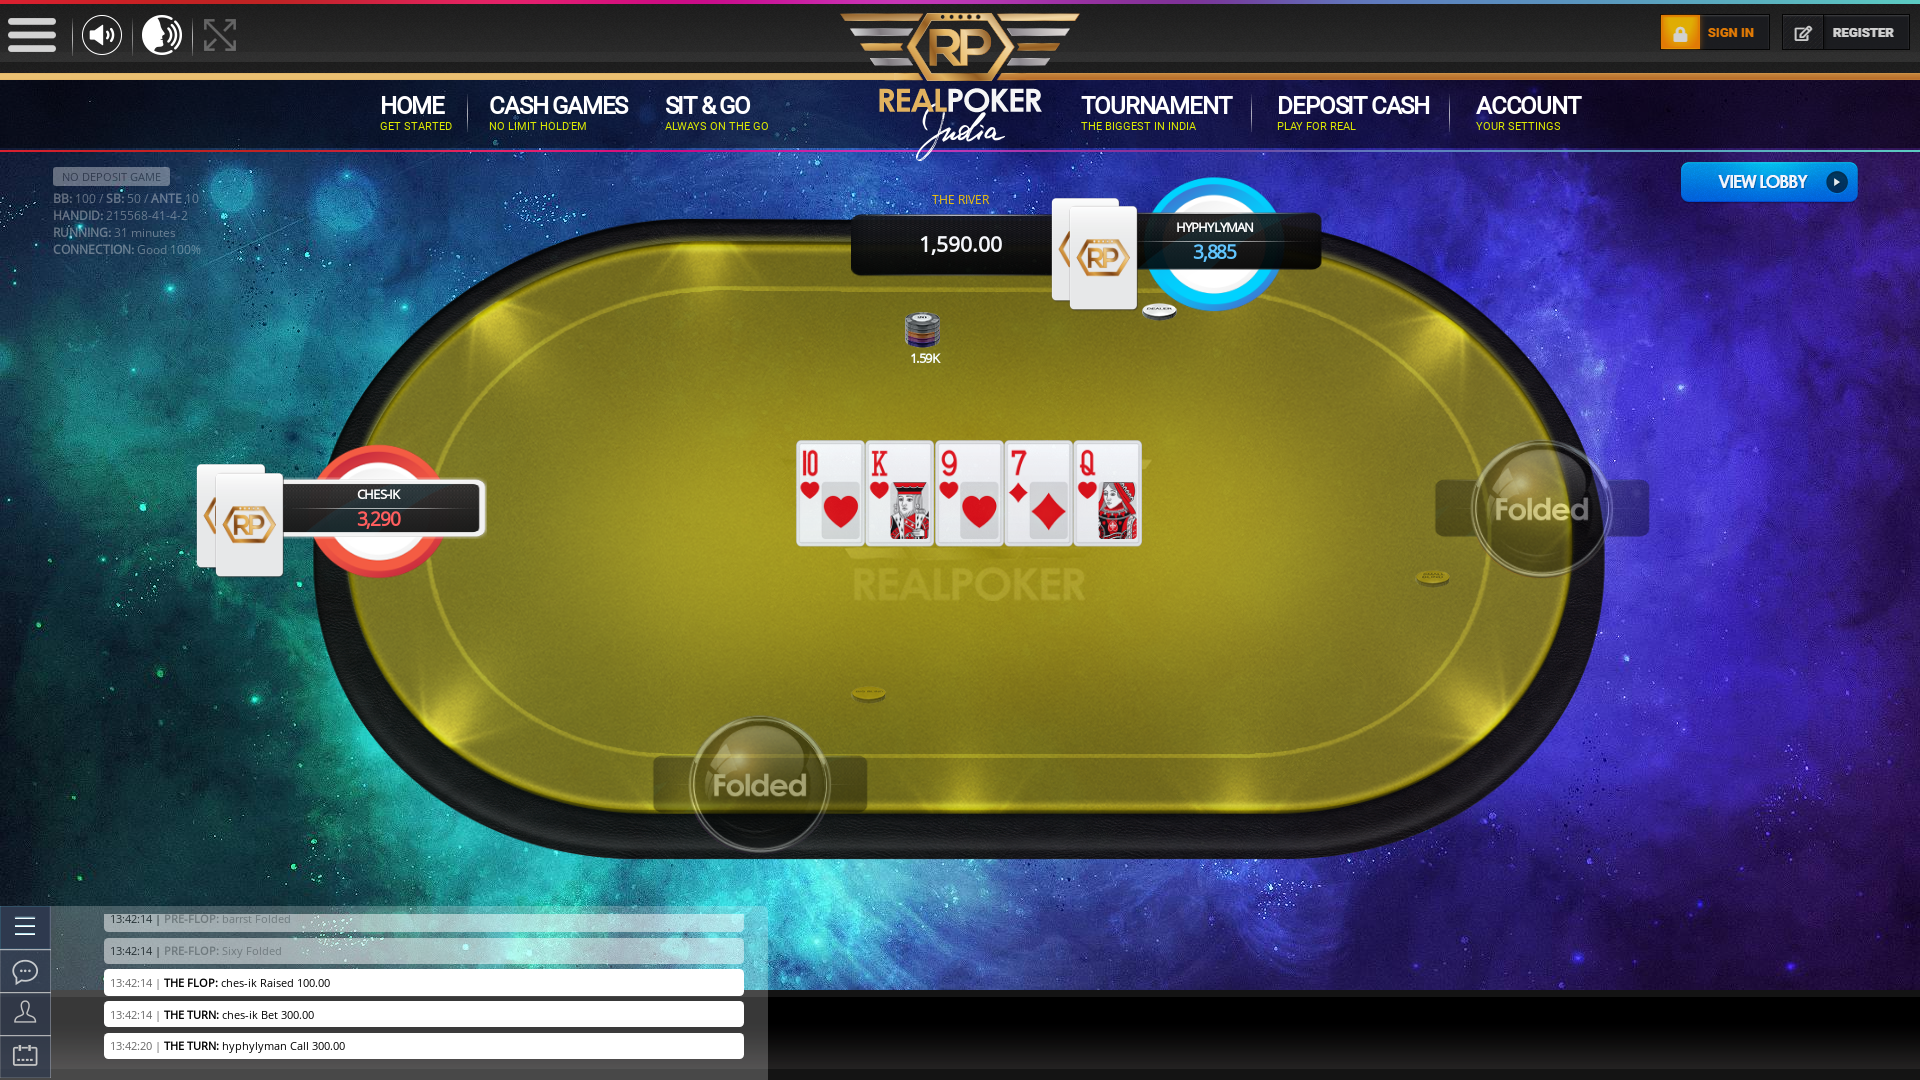 Santa Cruz, Mumbai poker table on a 10 player table in the 31st minute